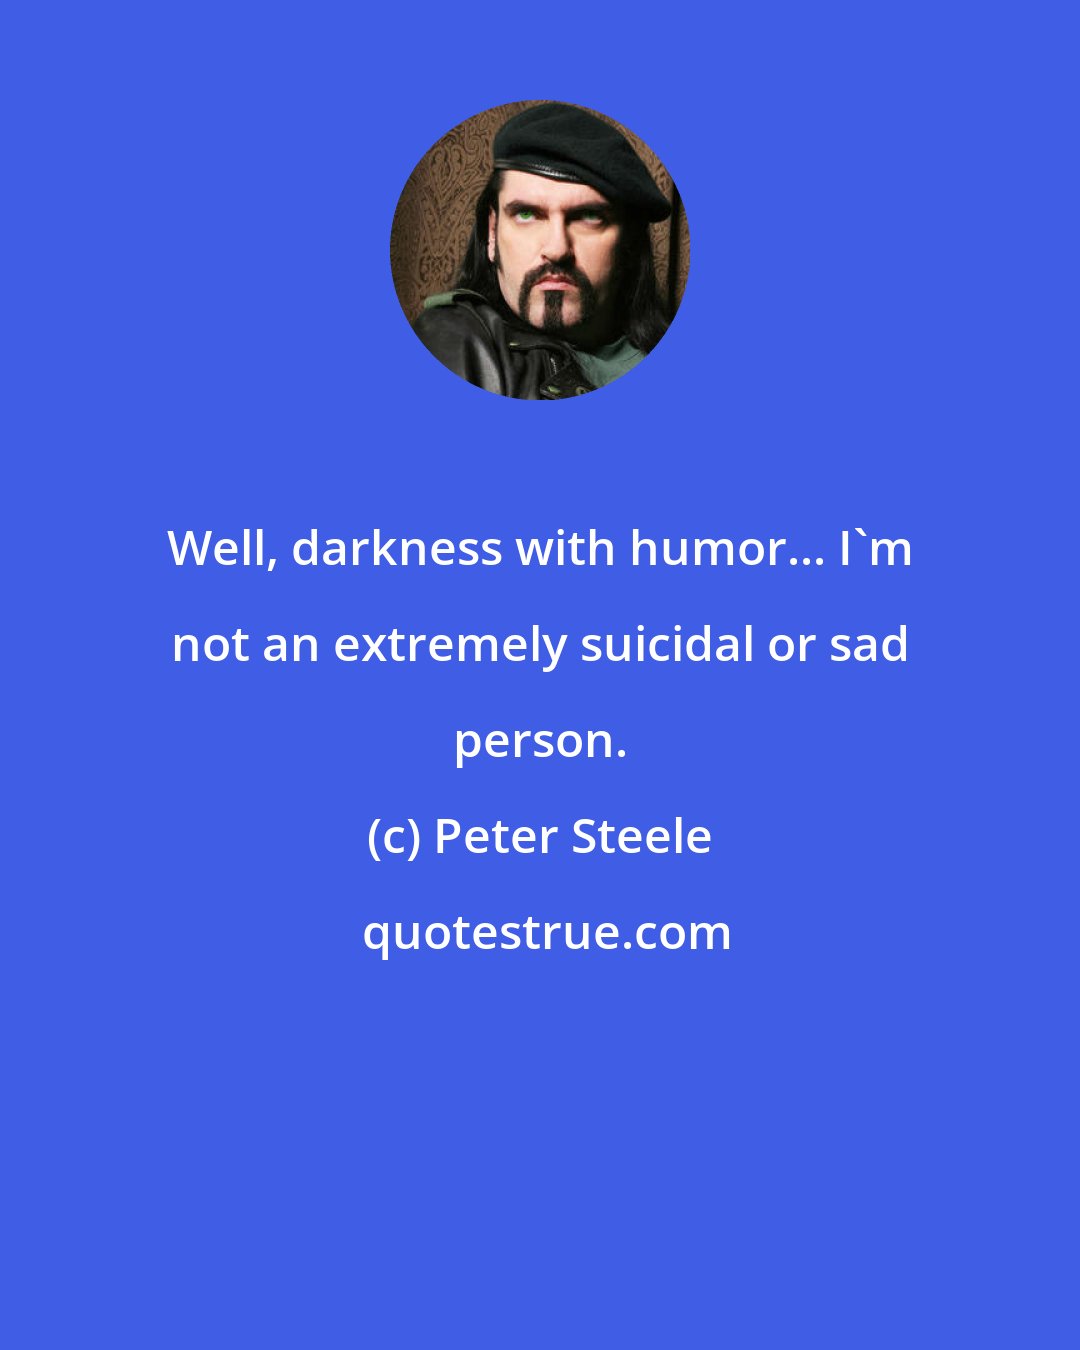 Peter Steele: Well, darkness with humor... I'm not an extremely suicidal or sad person.